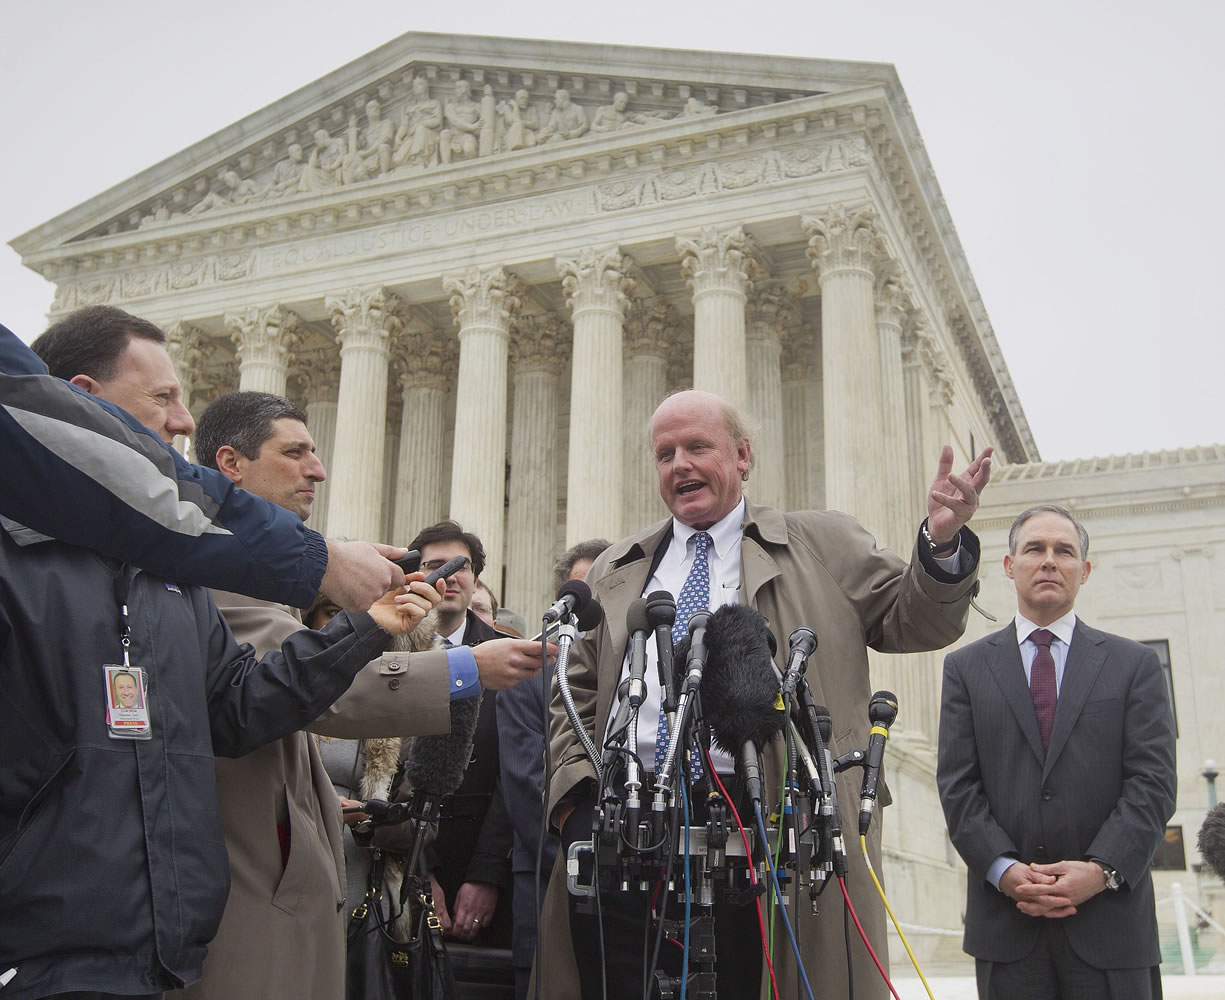 Michael Carvin, center, lead attorney for the petitioners, speaks to reporters outside the Supreme Court in Washington on Wednesday.